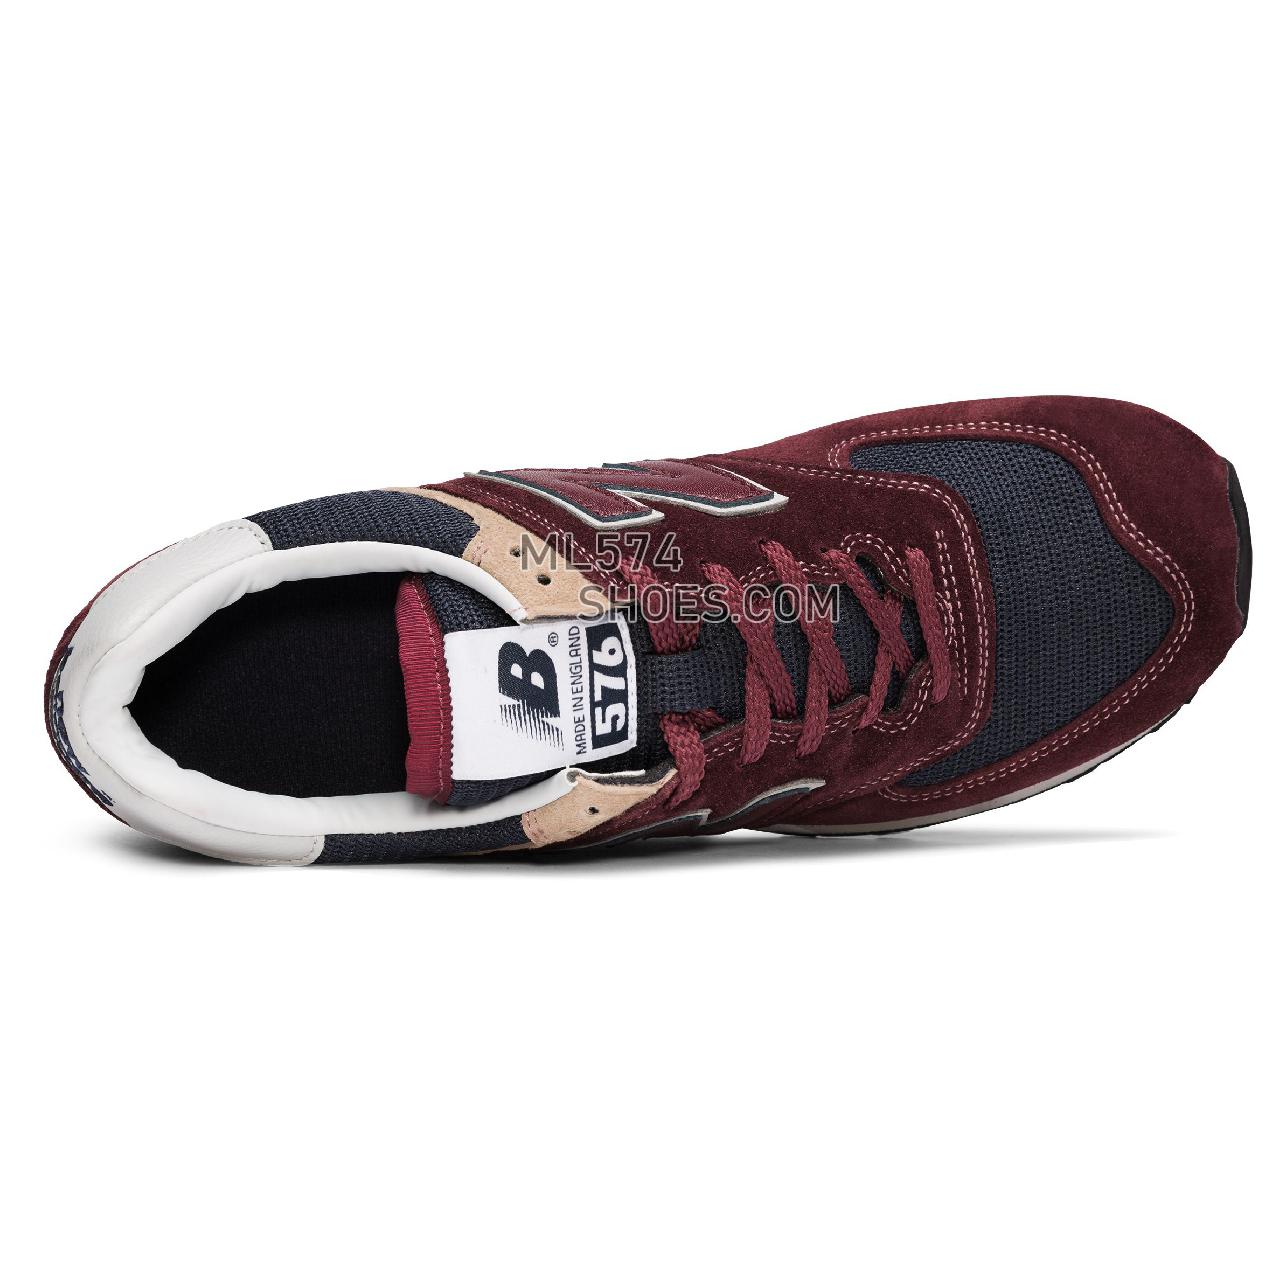 New Balance 576 Made in UK - Men's 576 - Classic Maroon - OM576OBN